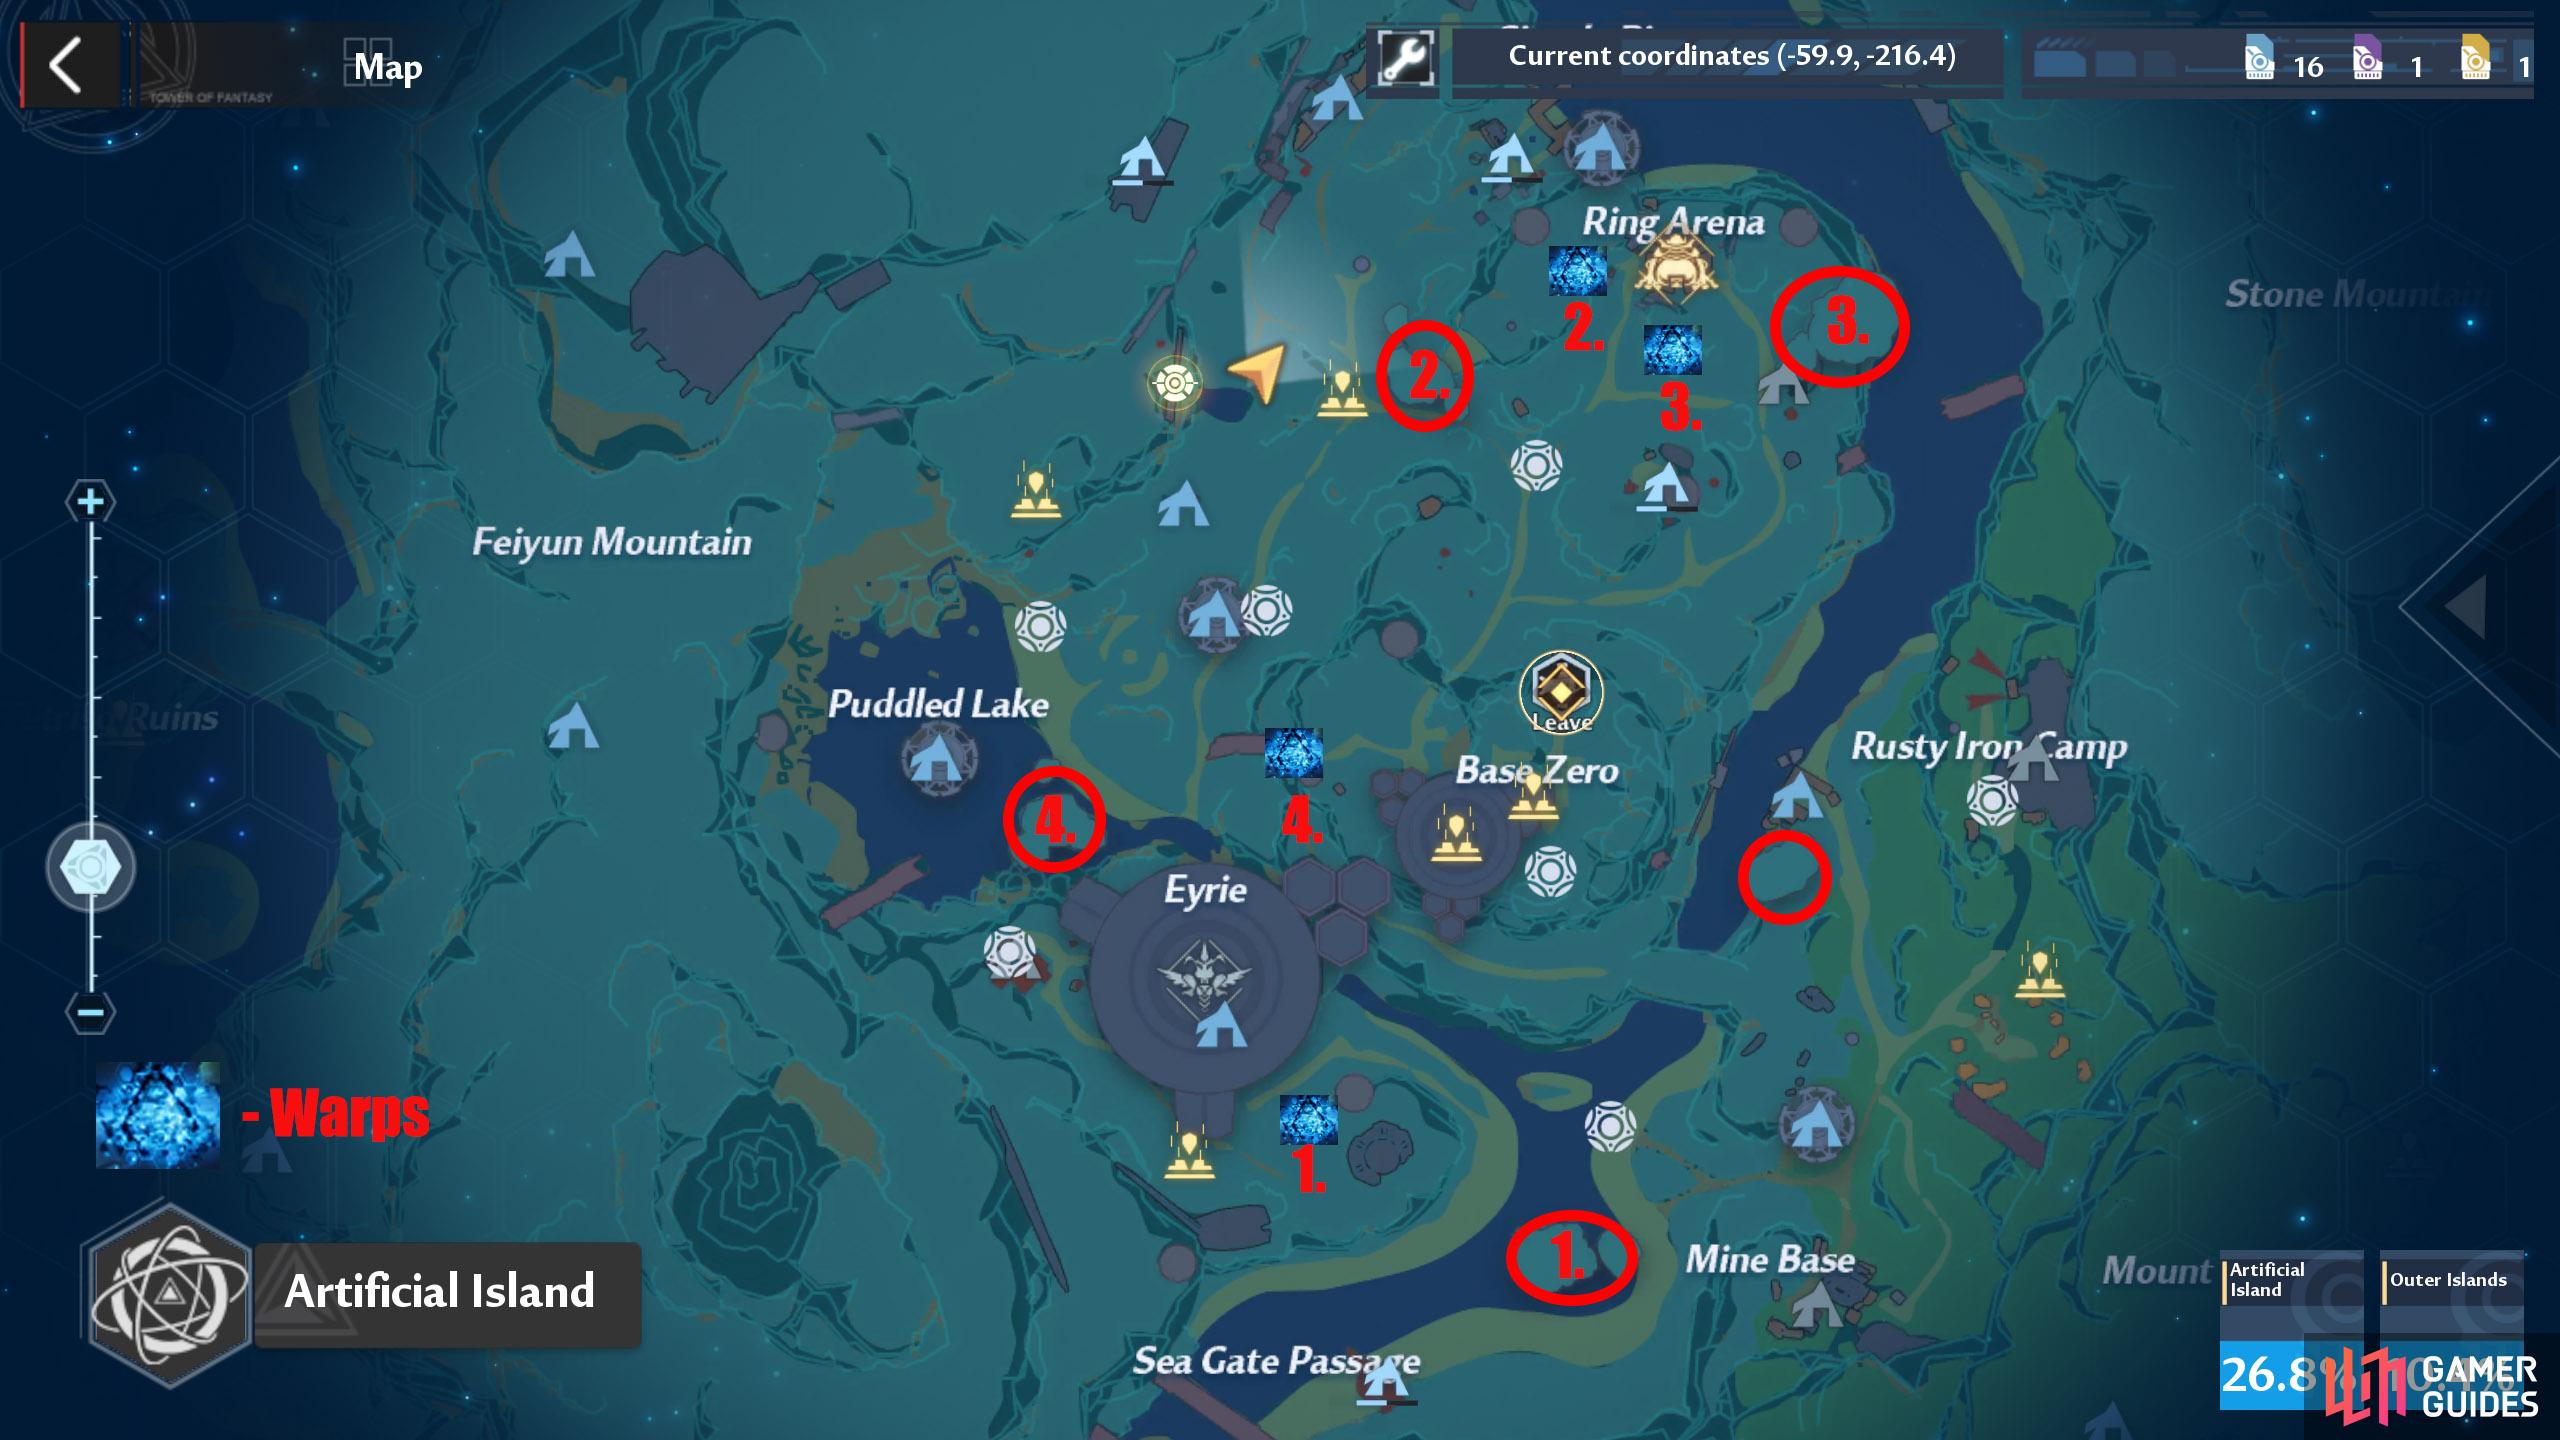 Artificial Island Map & Exploration Guide